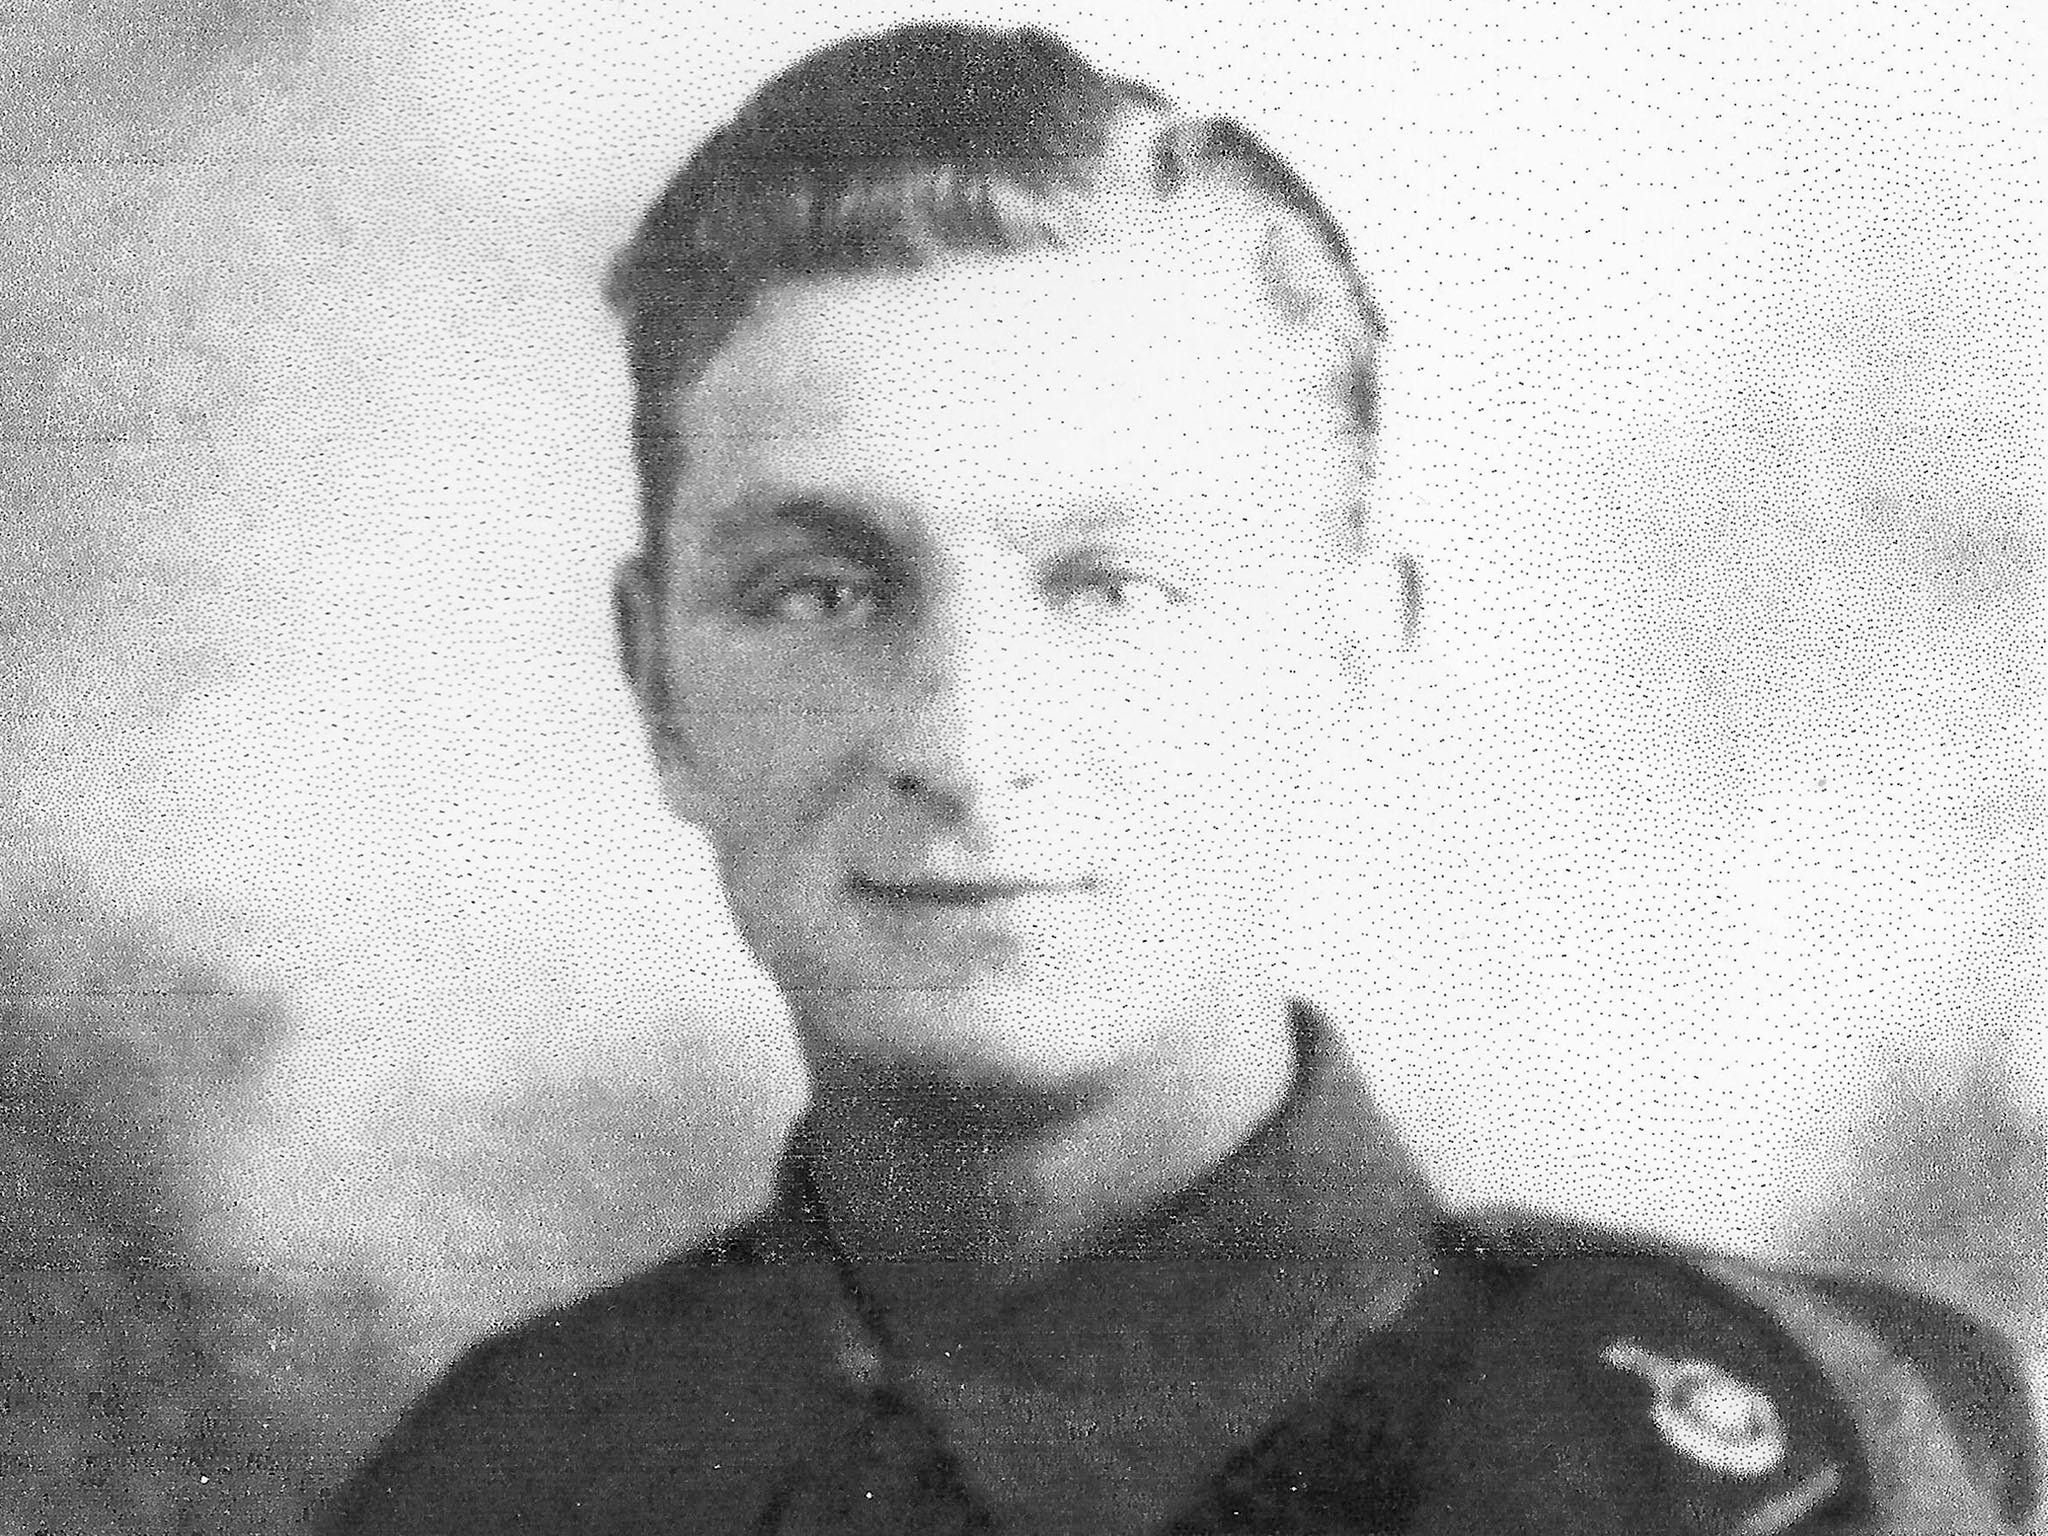 Parker as a young soldier. He lied about his age in order to enlist at a royal marines recruitment office